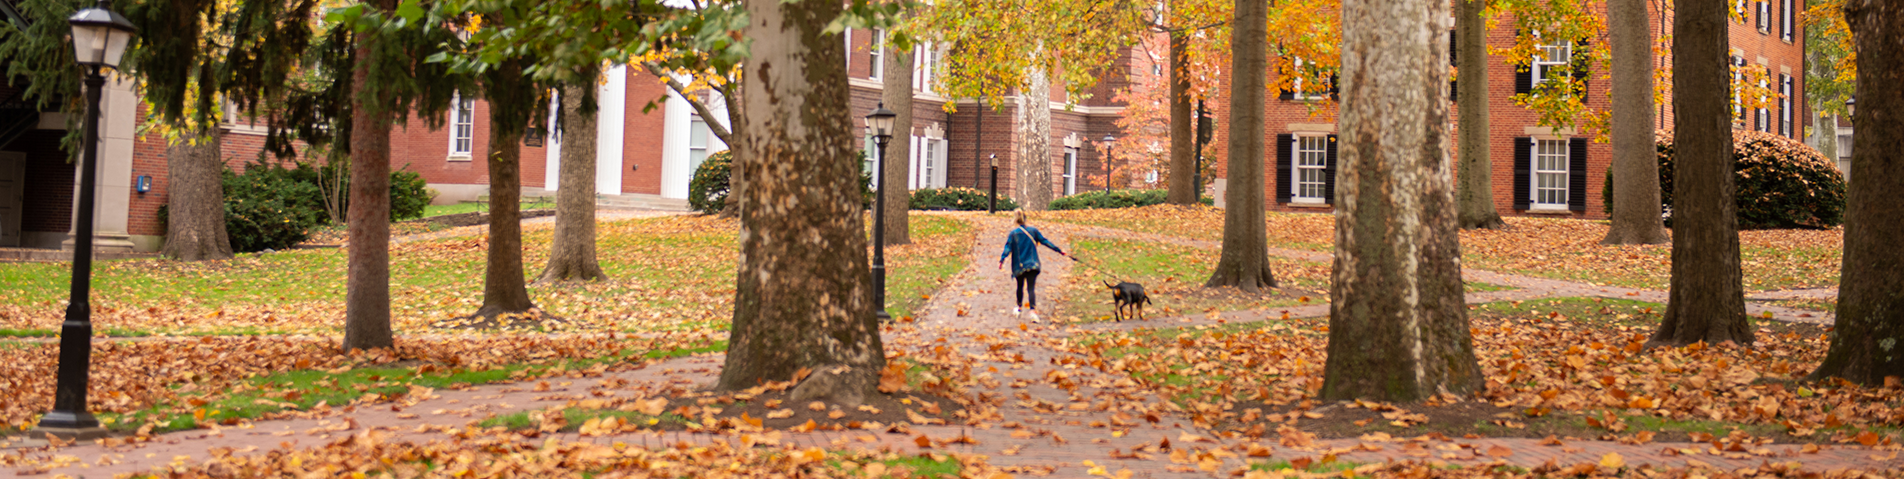 lady walking a dog on campus in the fall